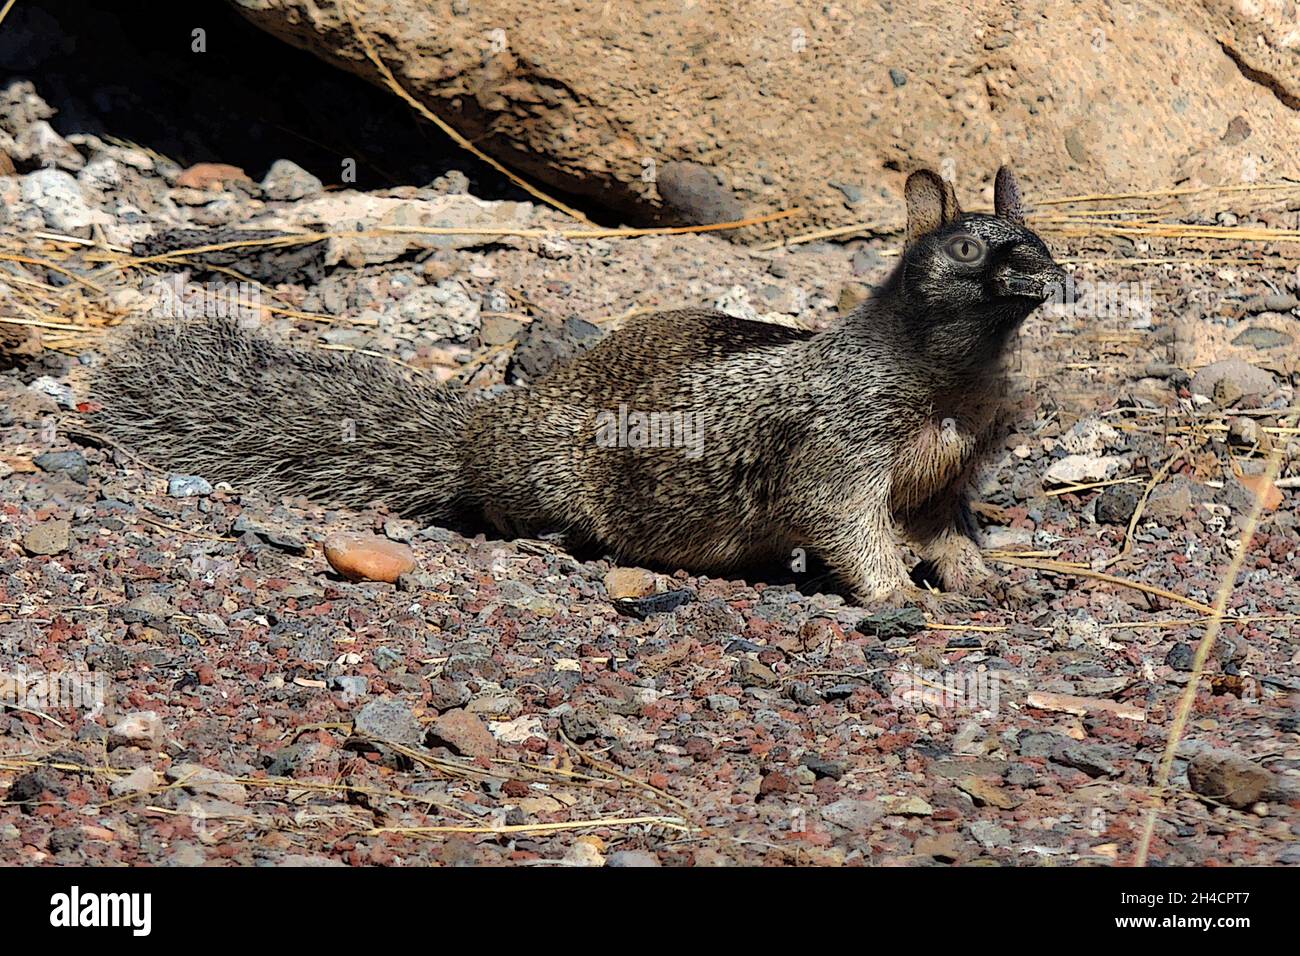 Closeup shot of an animal with a duck beak and a  squirrel body Stock Photo